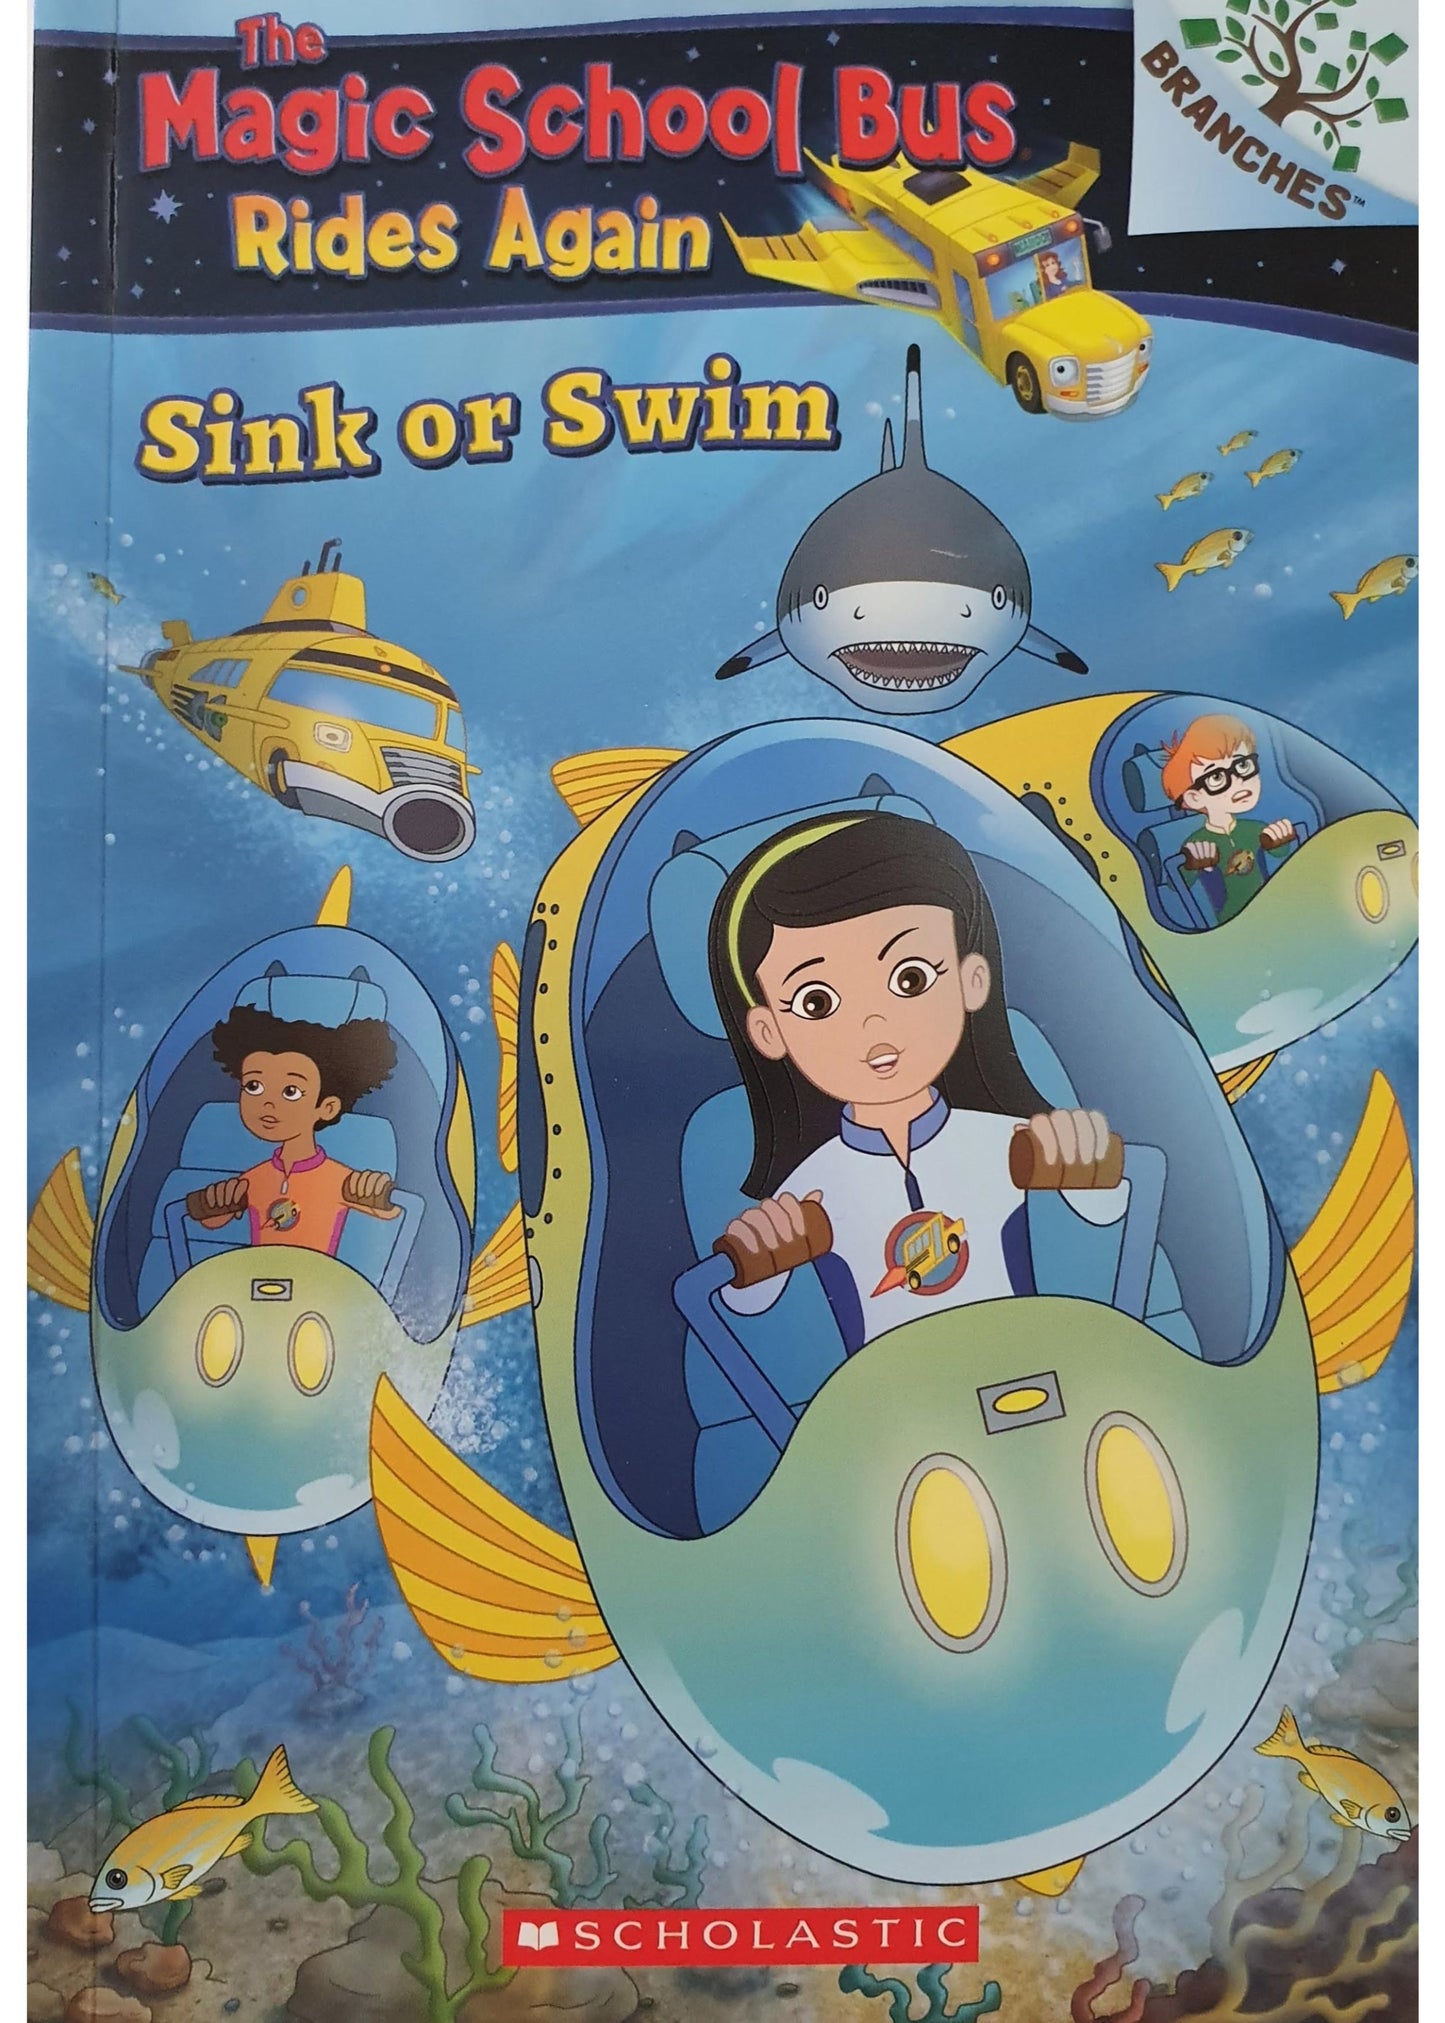 The Magic School Bus Rides Again-Sink or swim Like New Not Applicable  (4600971755575)